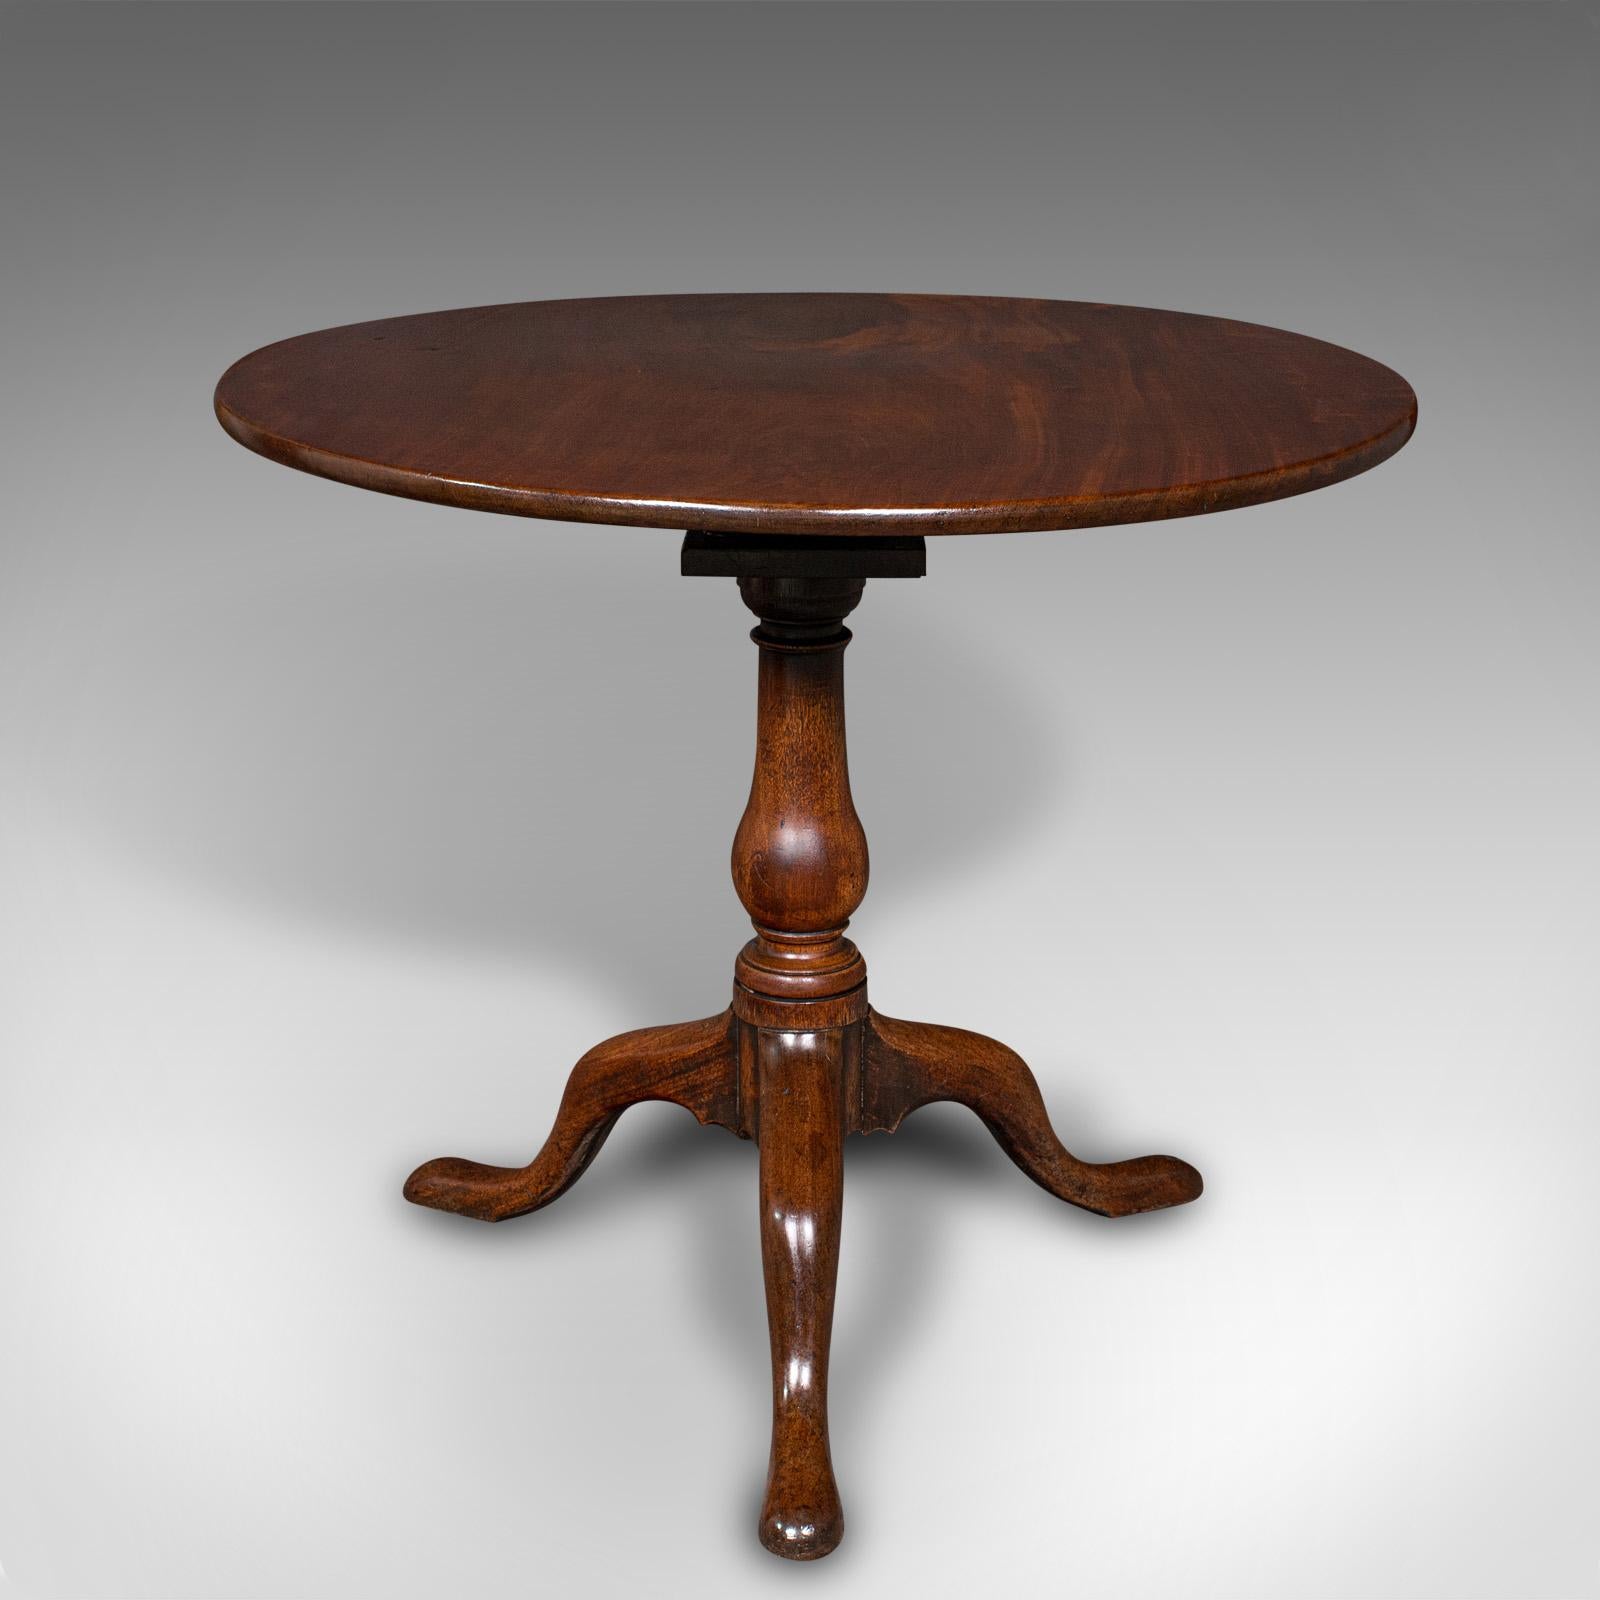 18th Century Antique Tilt Top Table, English, Mahogany, Side, Lamp, Rotary, Georgian, C.1760 For Sale